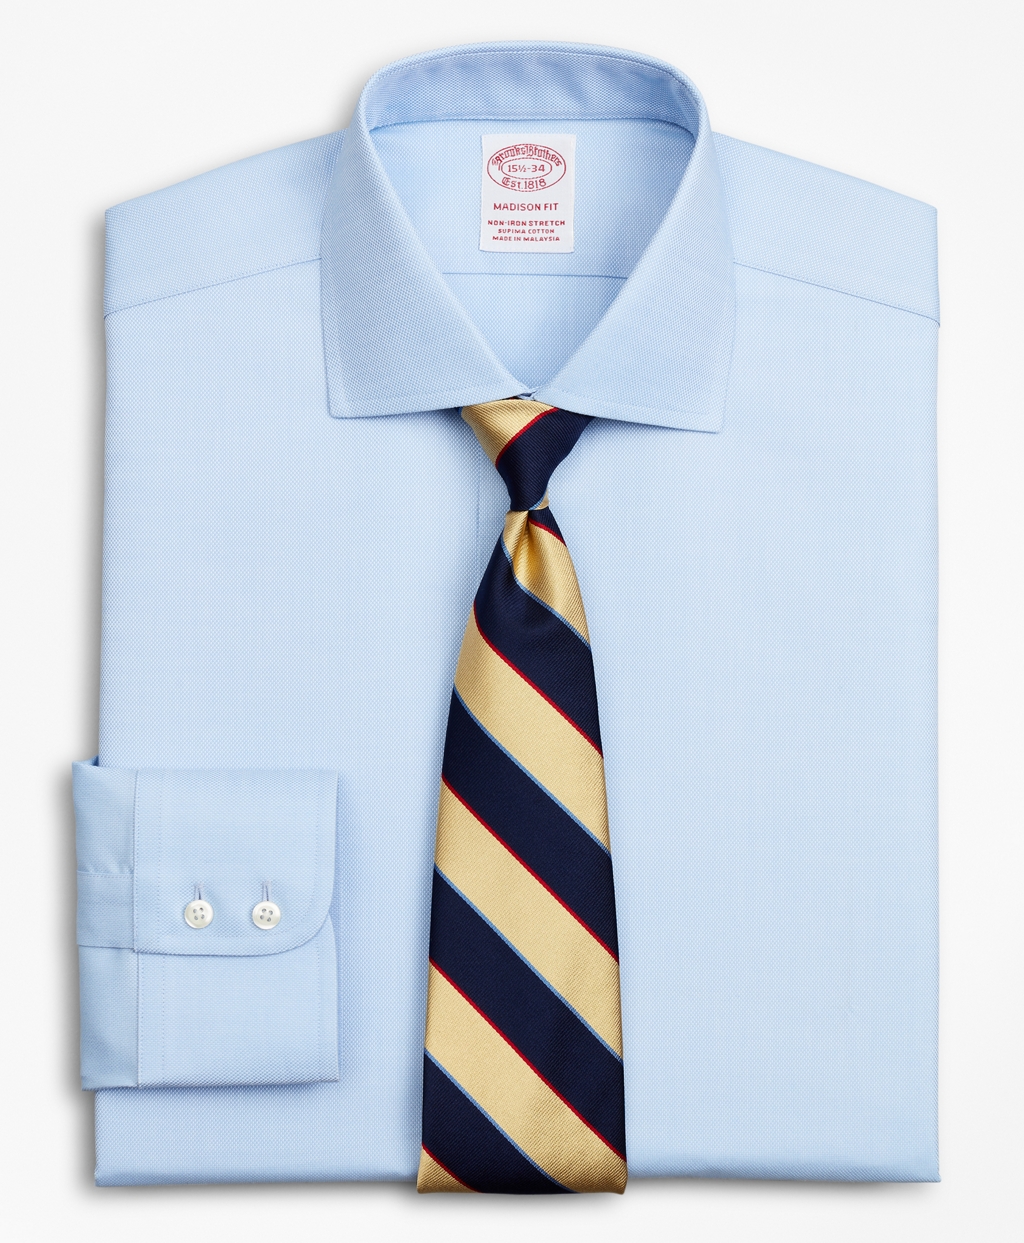 Brooksbrothers Stretch Madison Relaxed-Fit Dress Shirt, Non-Iron Royal Oxford English Collar